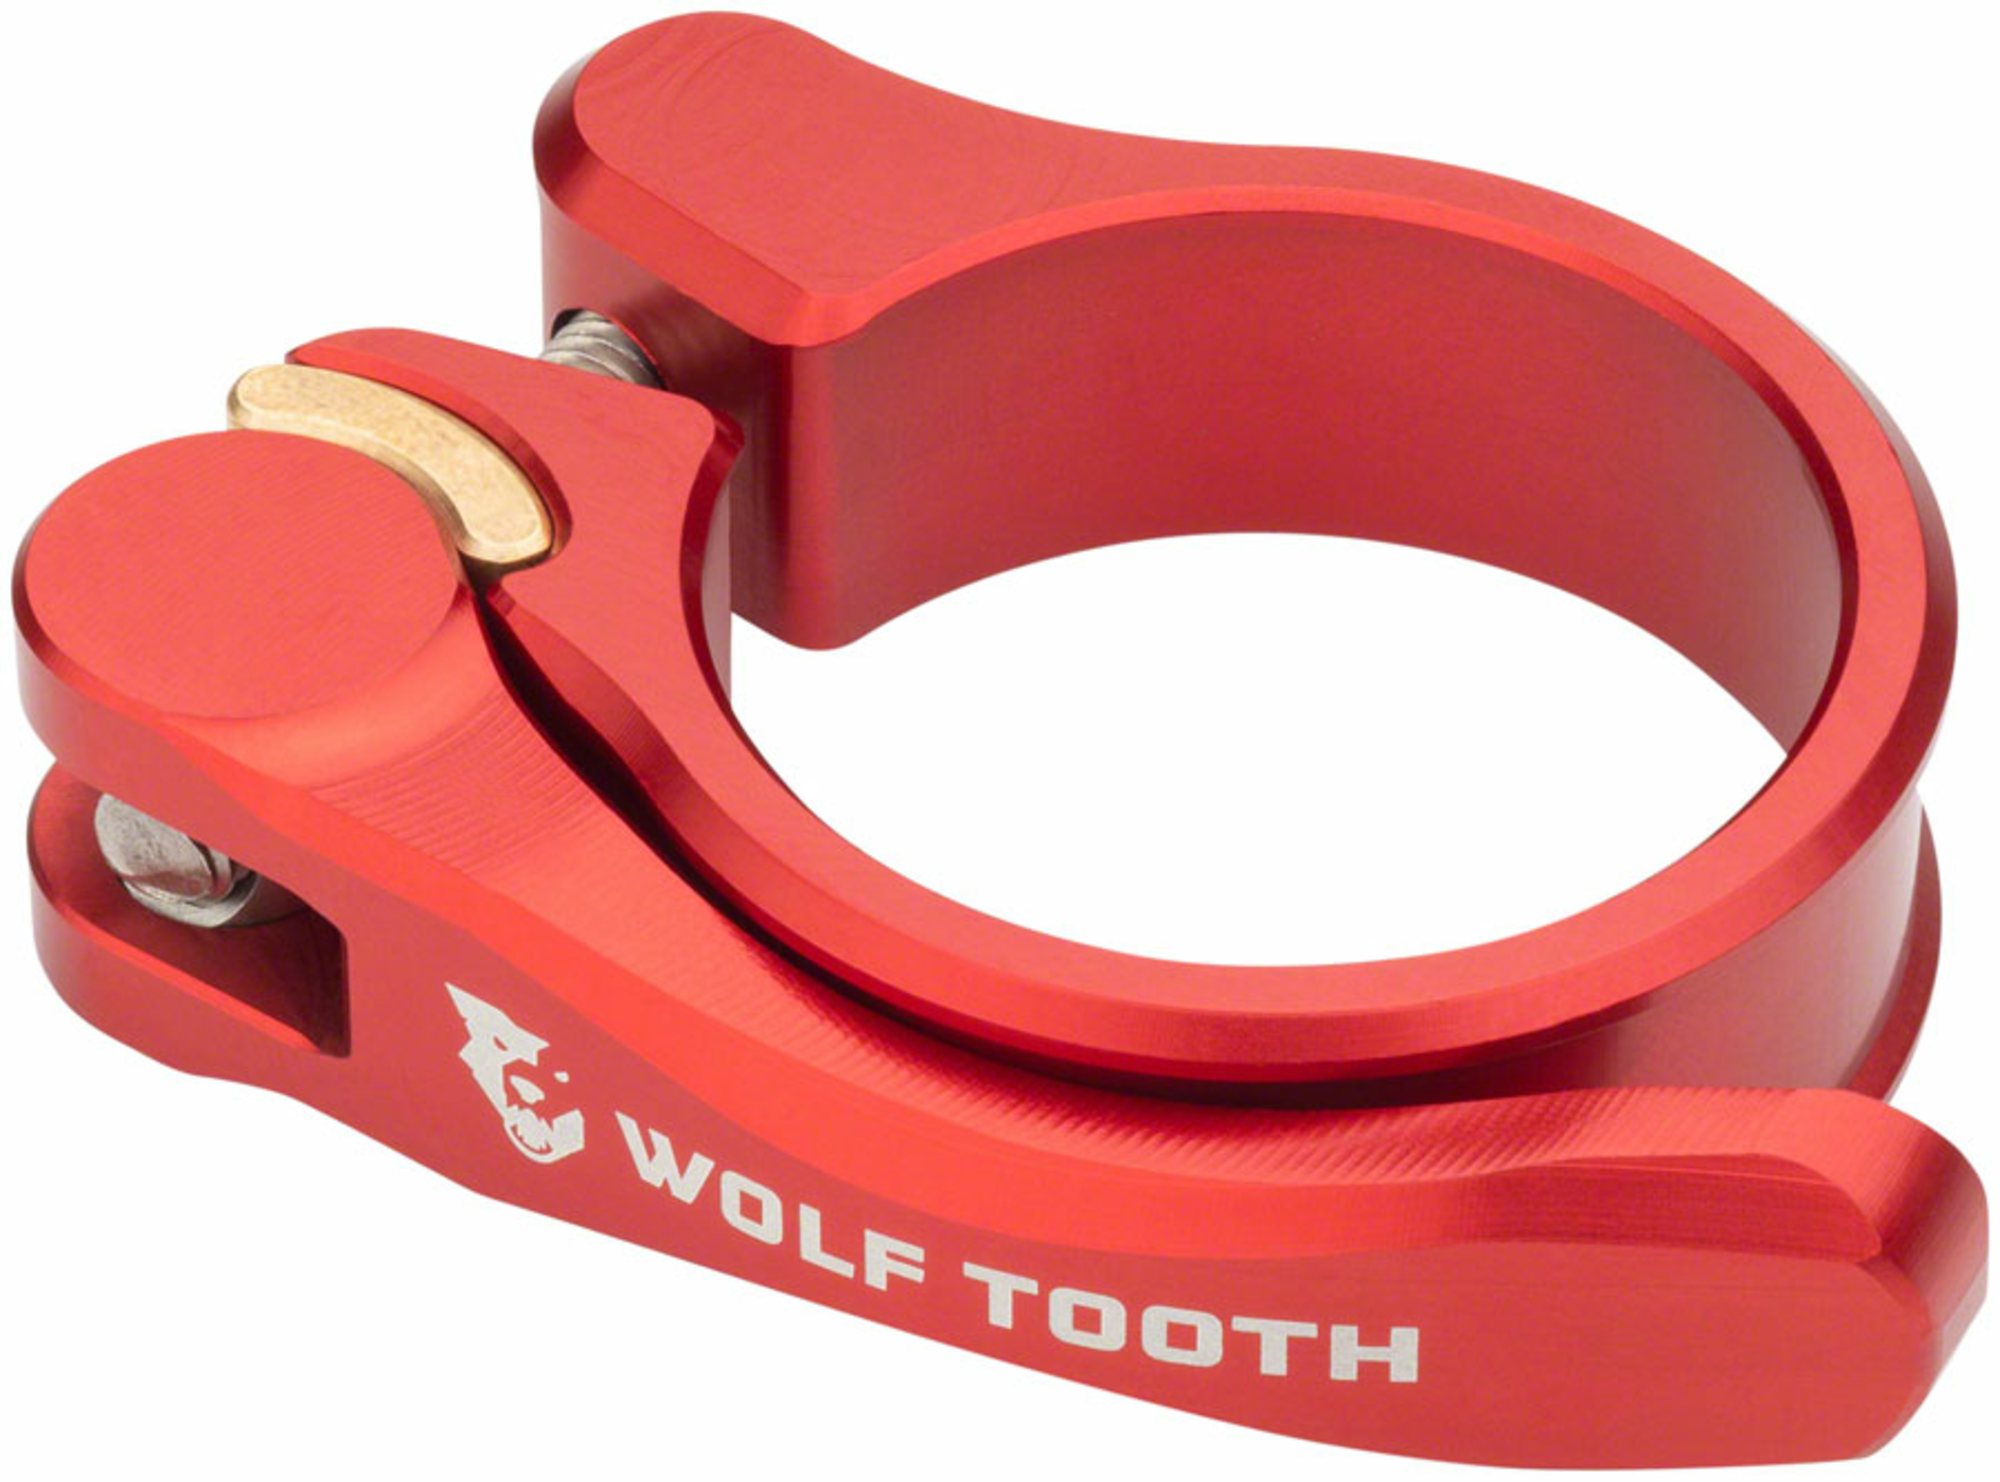 Components　Release　Clamp　Tooth　Wolf　Tooth　Ski　Red　Wolf　Quick　Continental　Seatpost　34.9mm,　Bike